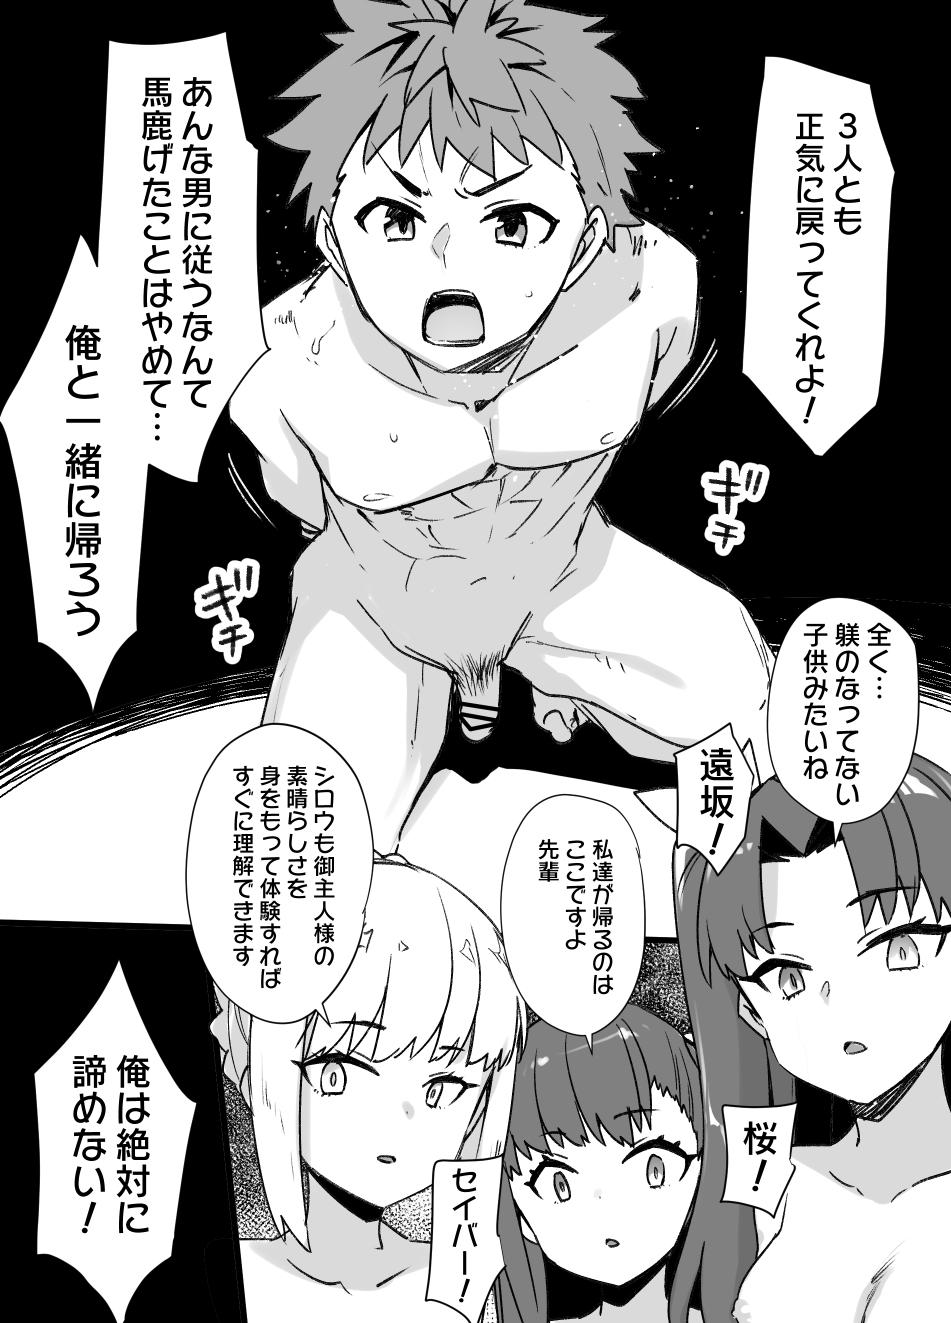 Taboo A manga about Shirou Emiya who went to save Rin Tohsaka from captivity and is transformed into a female slave through physical feminization and brainwashing[Fate/ stay night) - Fate stay night Celeb - Page 7